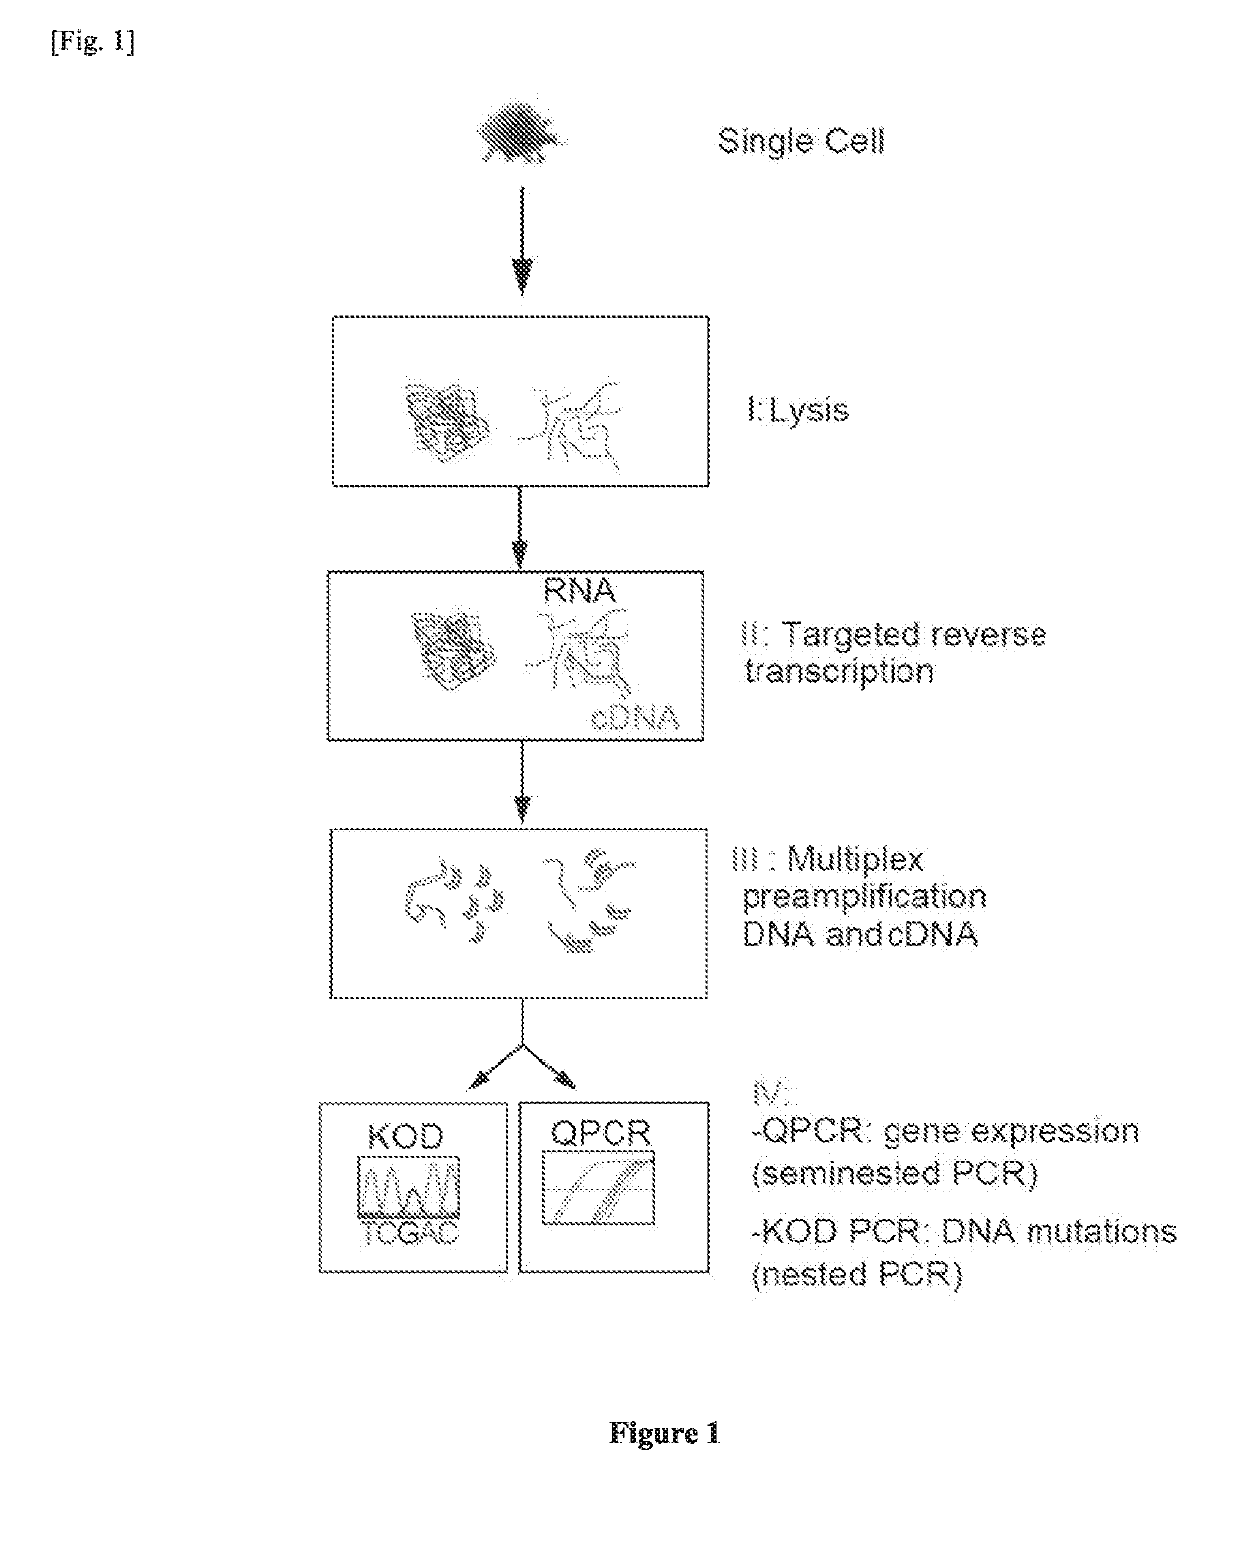 Single cell RNA and mutational analysis PCR (scrm-PCR): a method for simultaneous analysis of DNA and RNA at the single-cell level